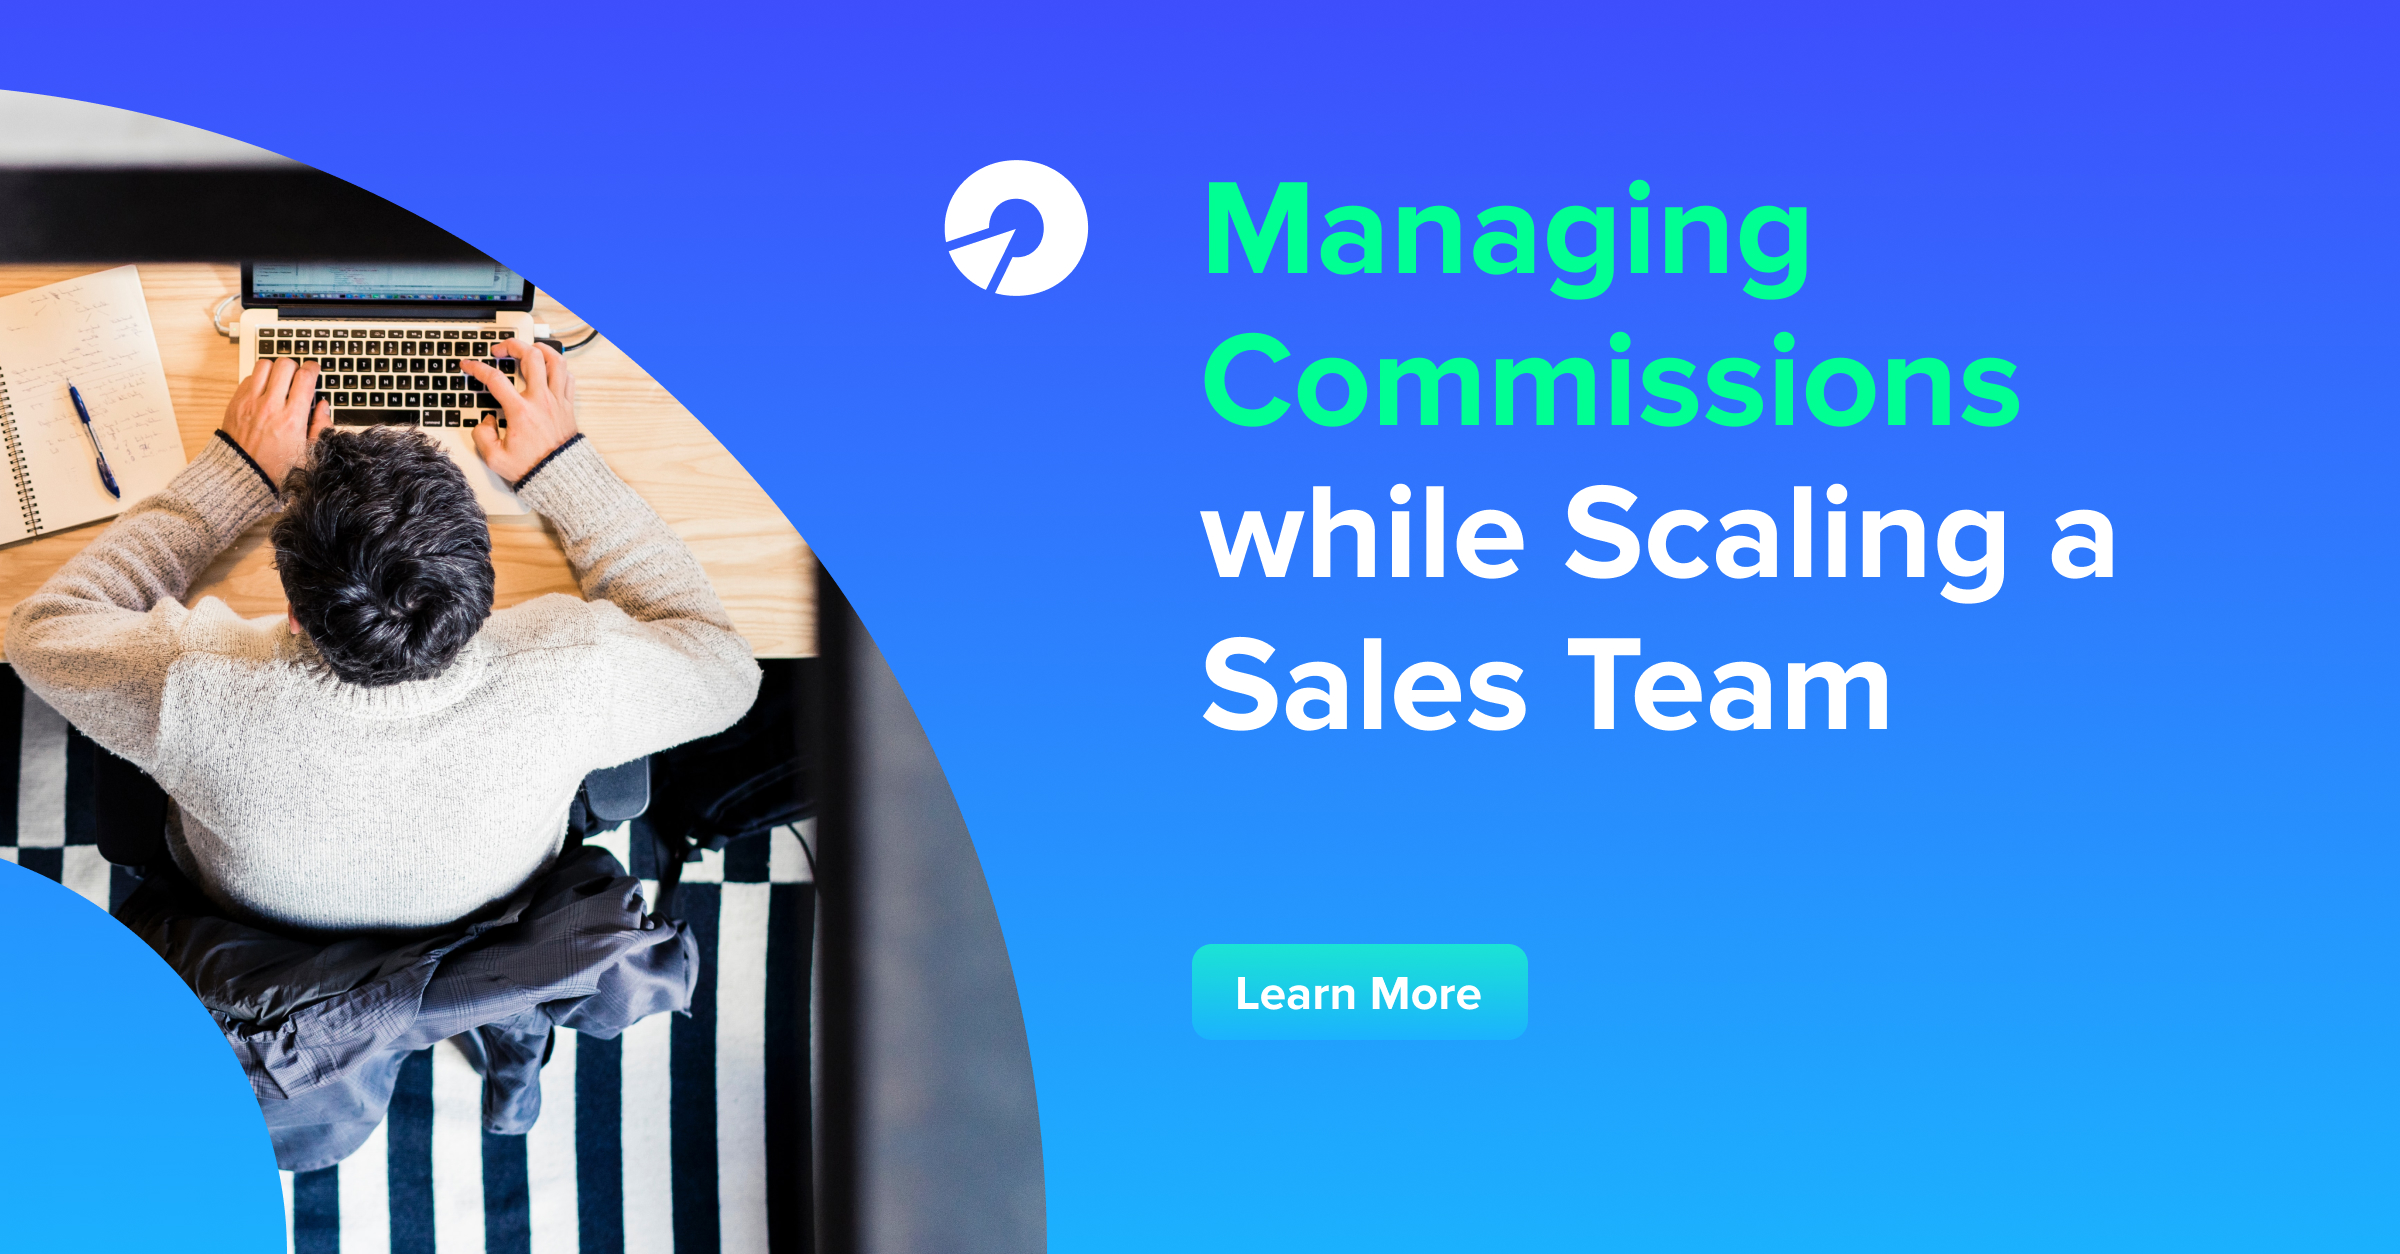 Managing Commissions while Scaling a Sales Team